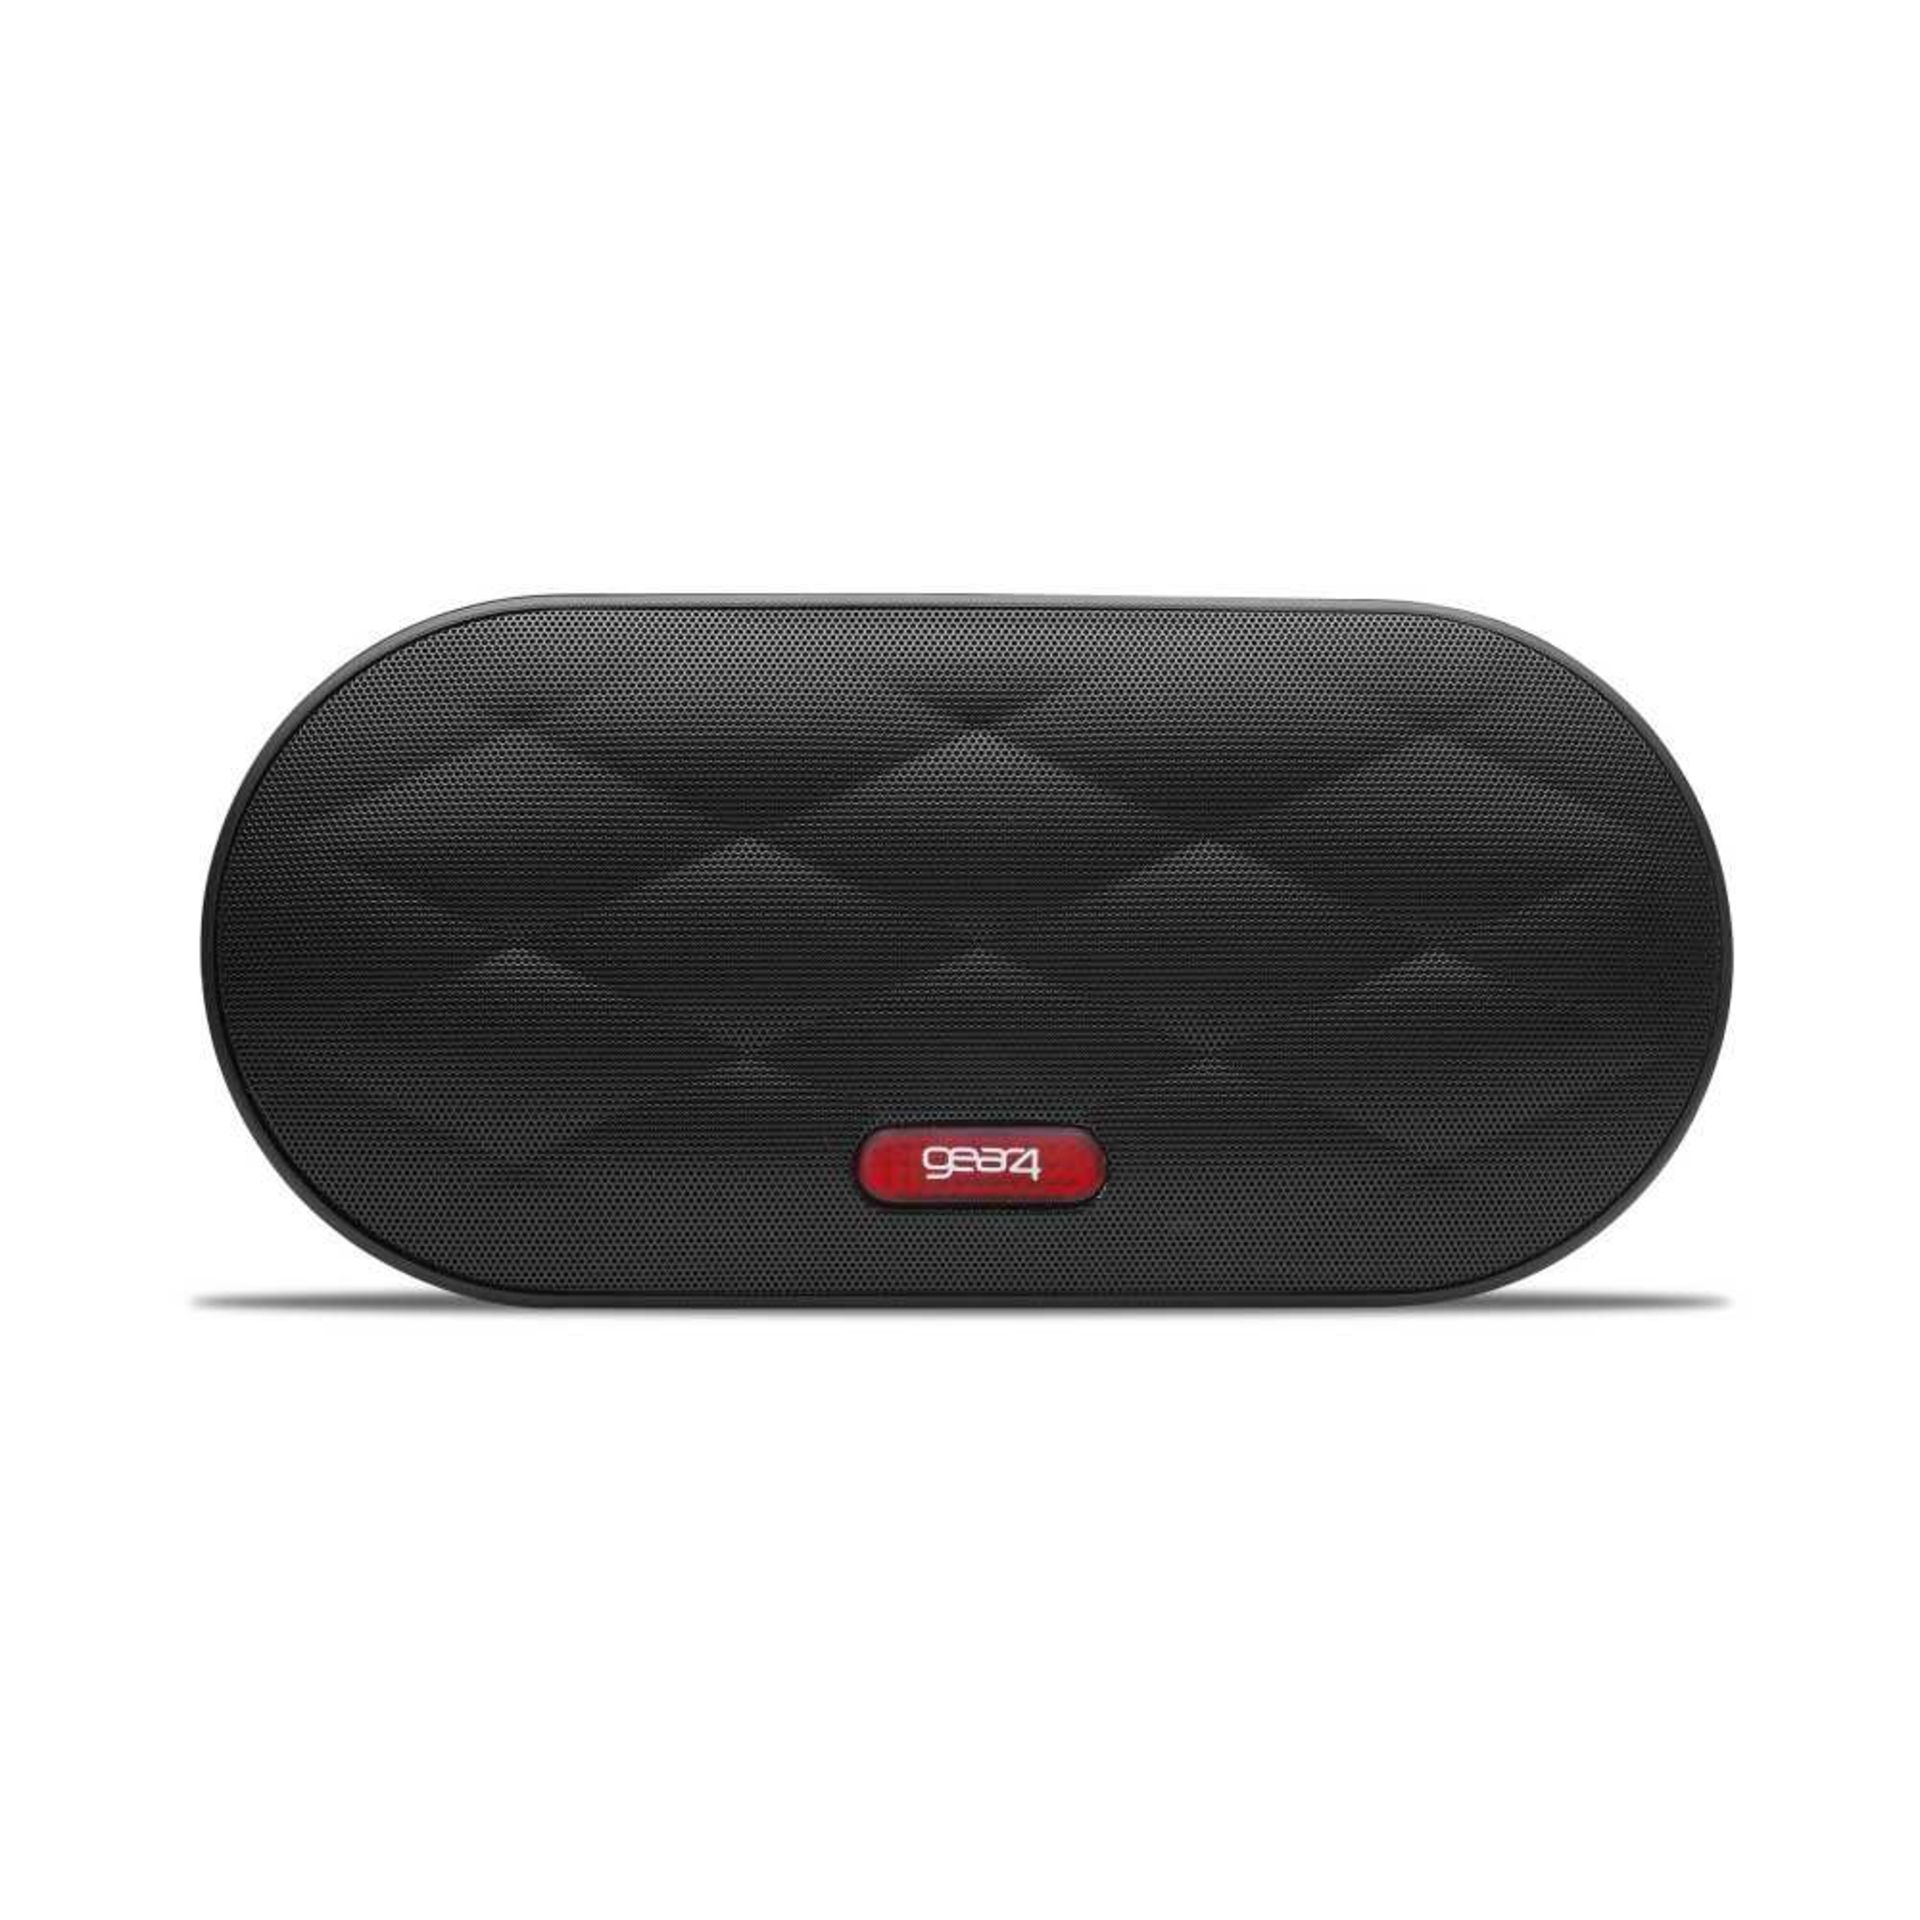 V Brand New Gear4 XOME Stereo Bluetooth Speaker - Stream Music From Bluetooth Devices Or Use The